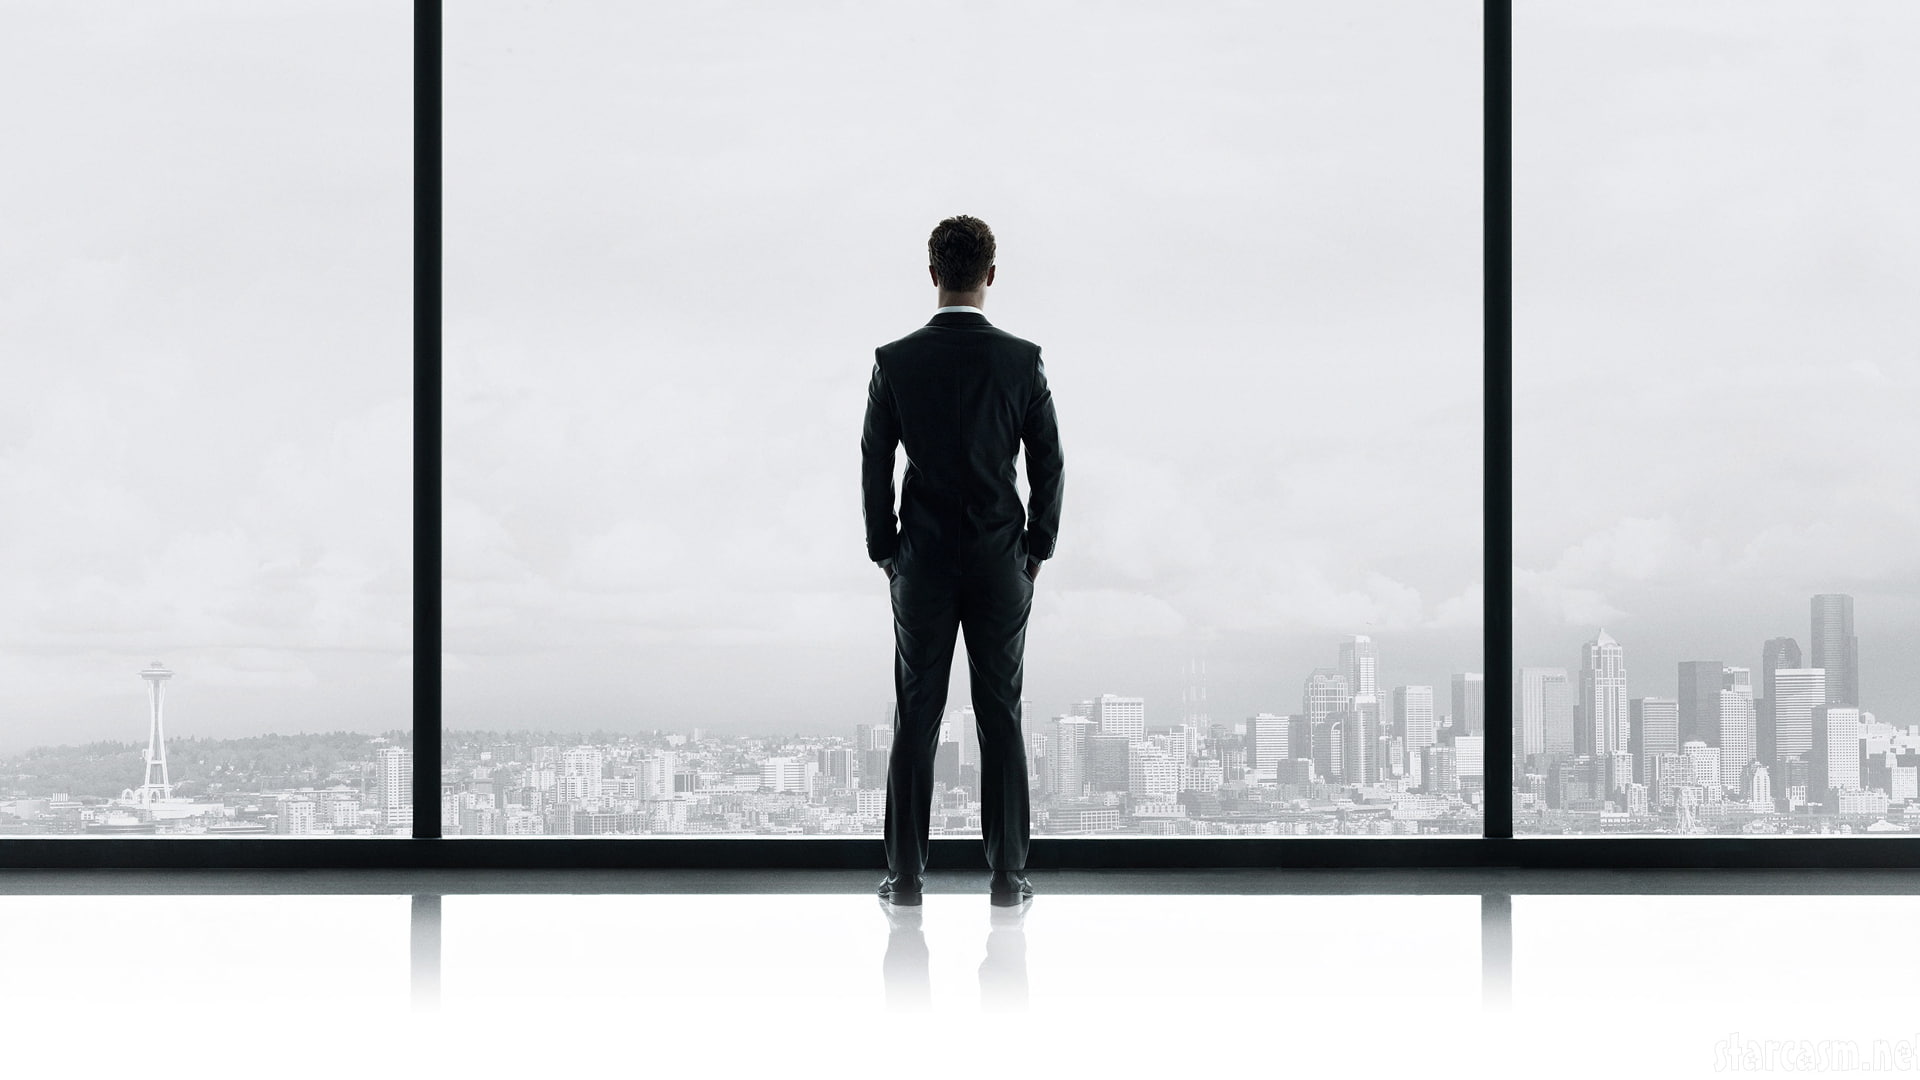 Jamie Dornan Fifty Shades Of Grey, rear view, one person, business person